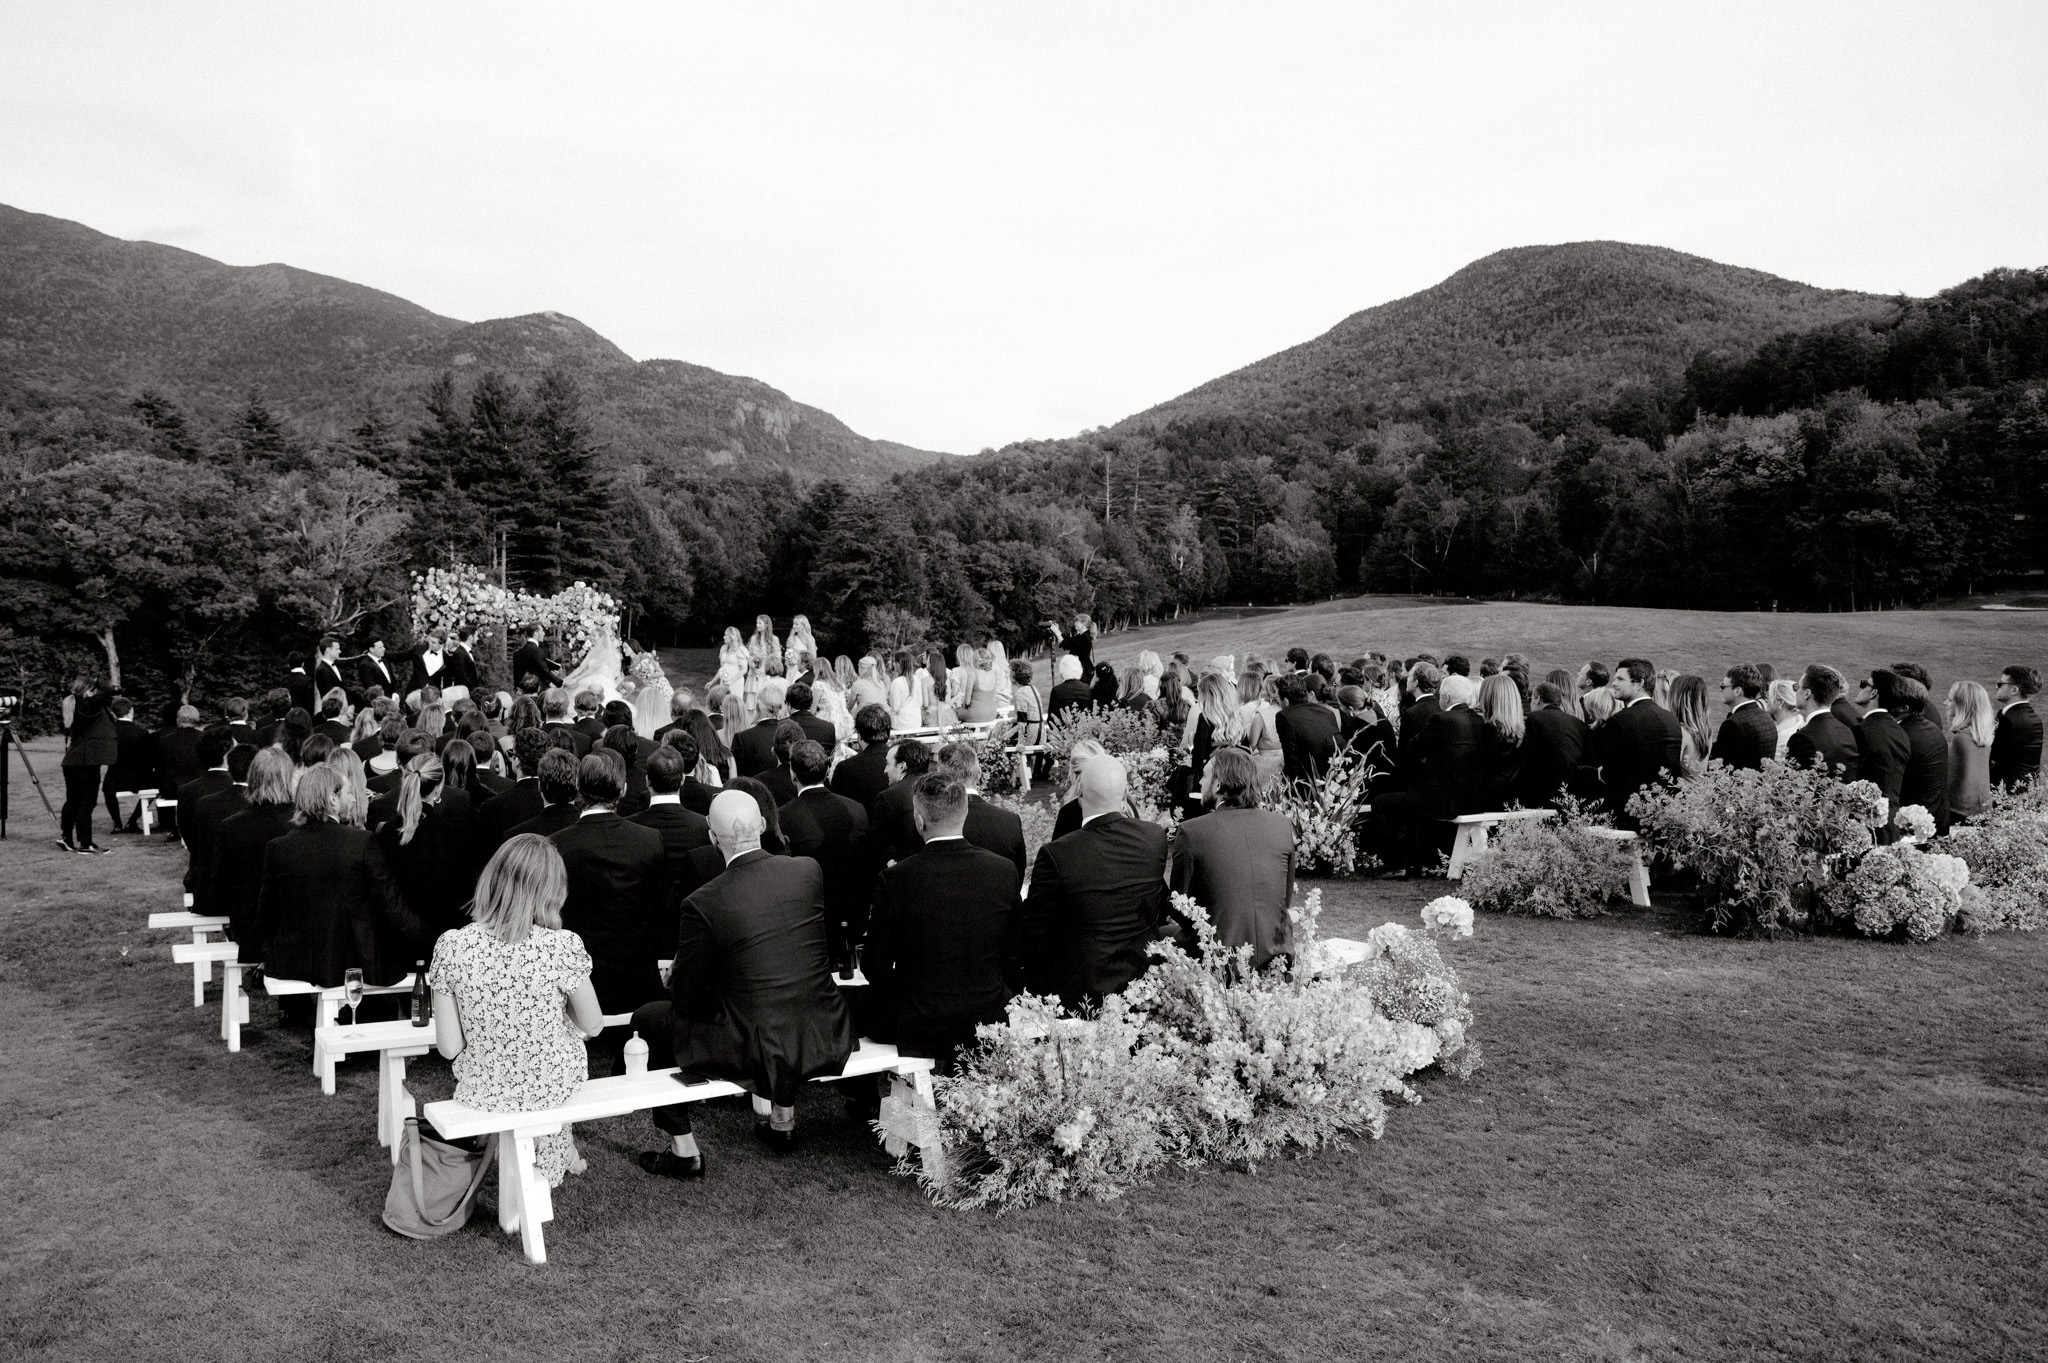 Scenic wedding ceremony atop a hill in the Adirondack Mountains. The couple exchanges vows surrounded by nature's grandeur, with panoramic views of majestic mountains creating a stunning backdrop for their special day.